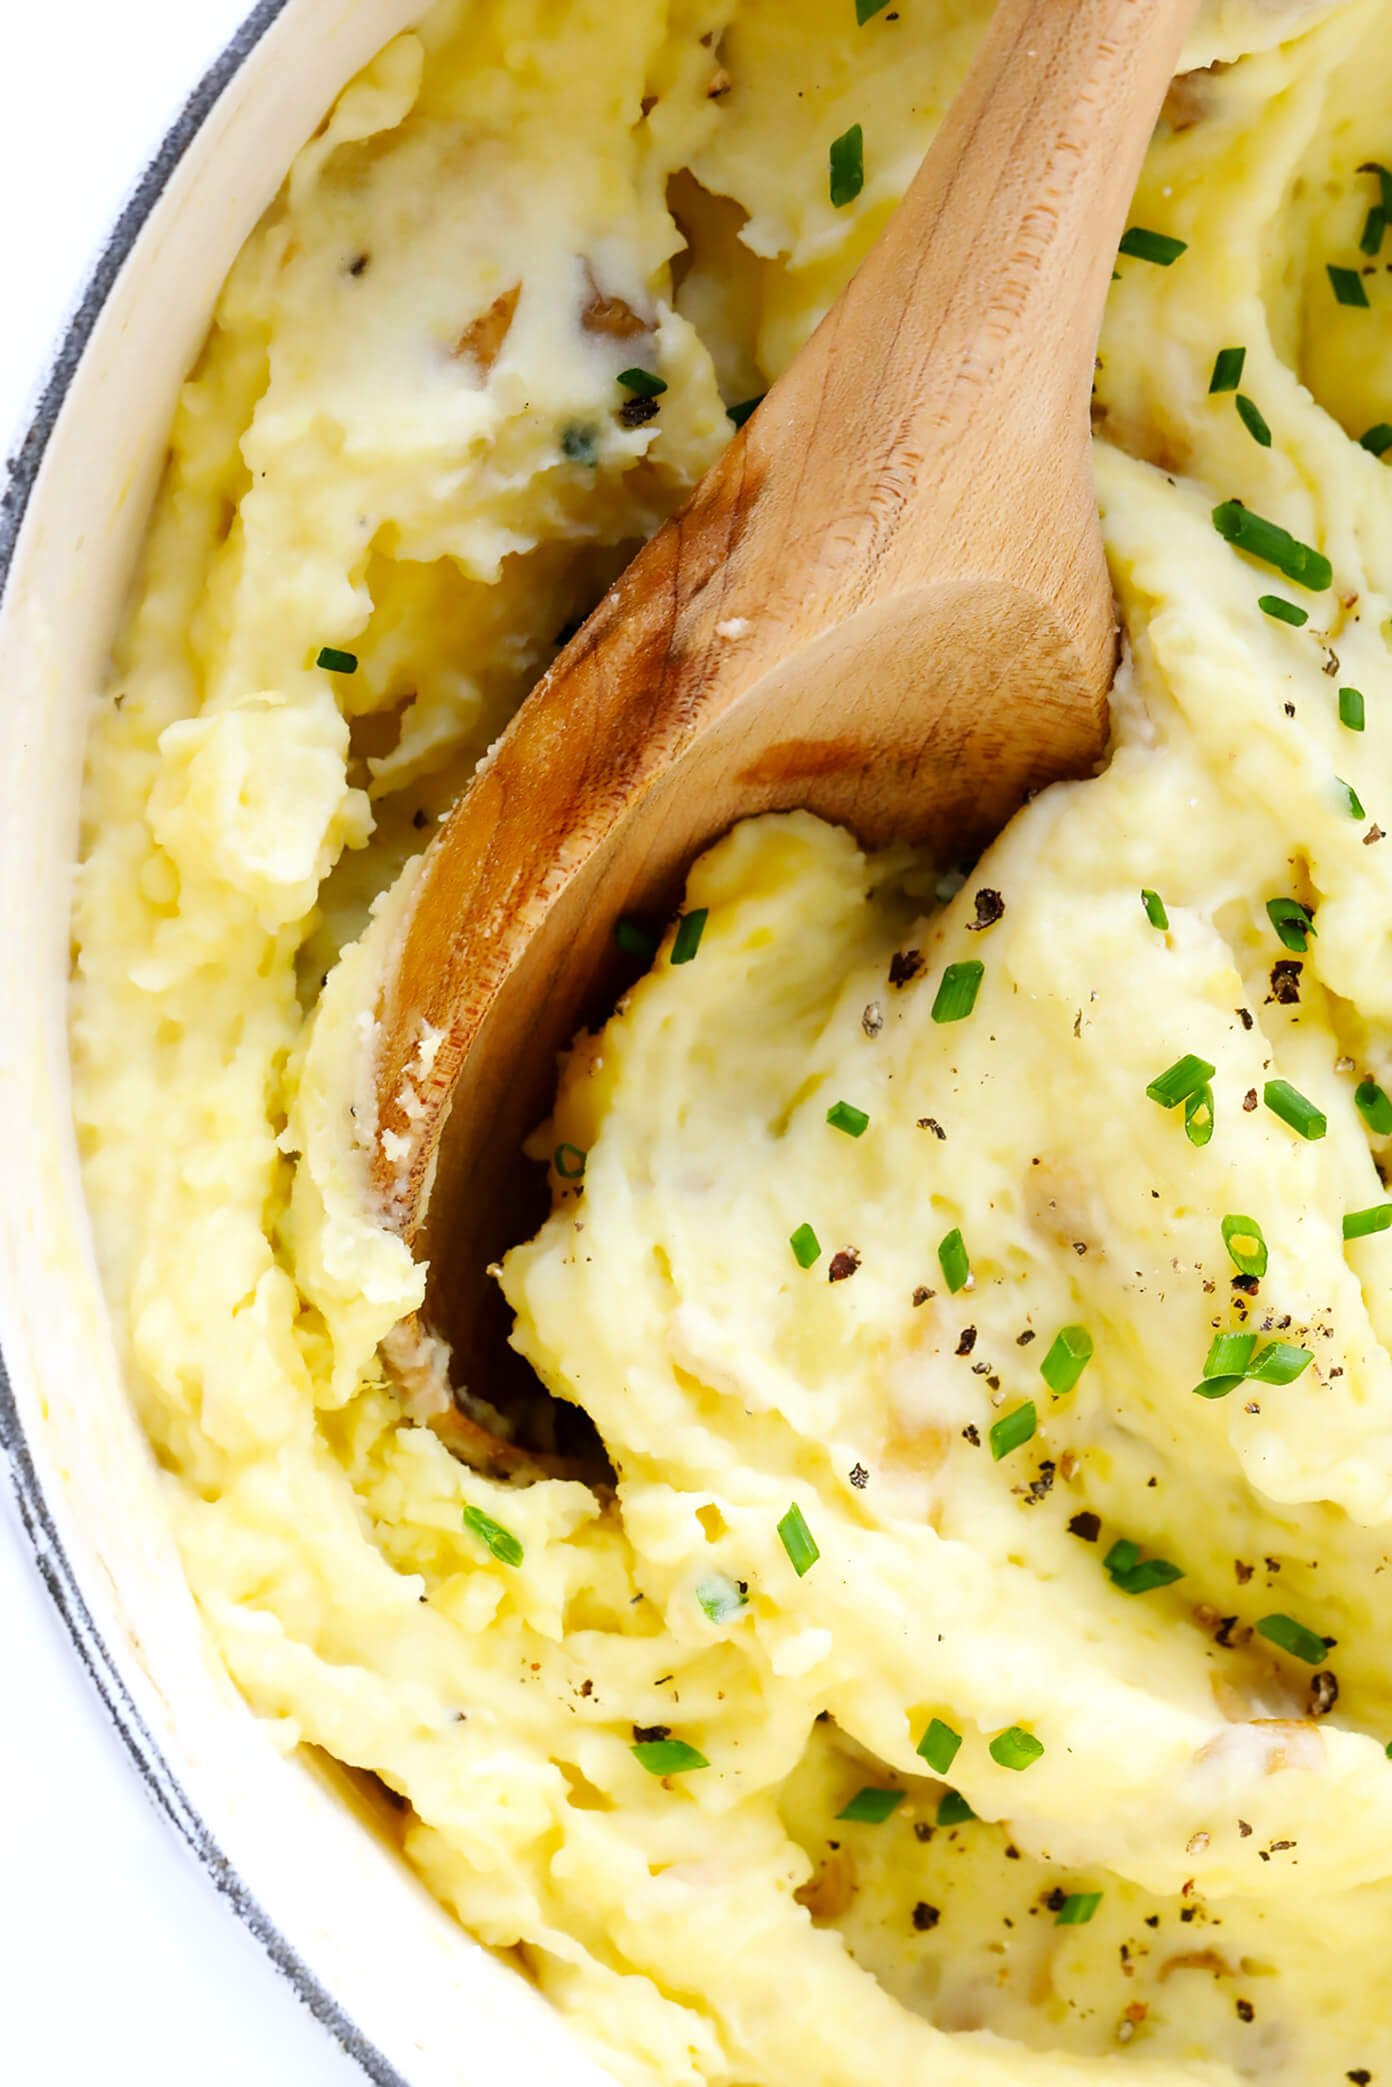 mashed potatoes in bowl with wooden spoon